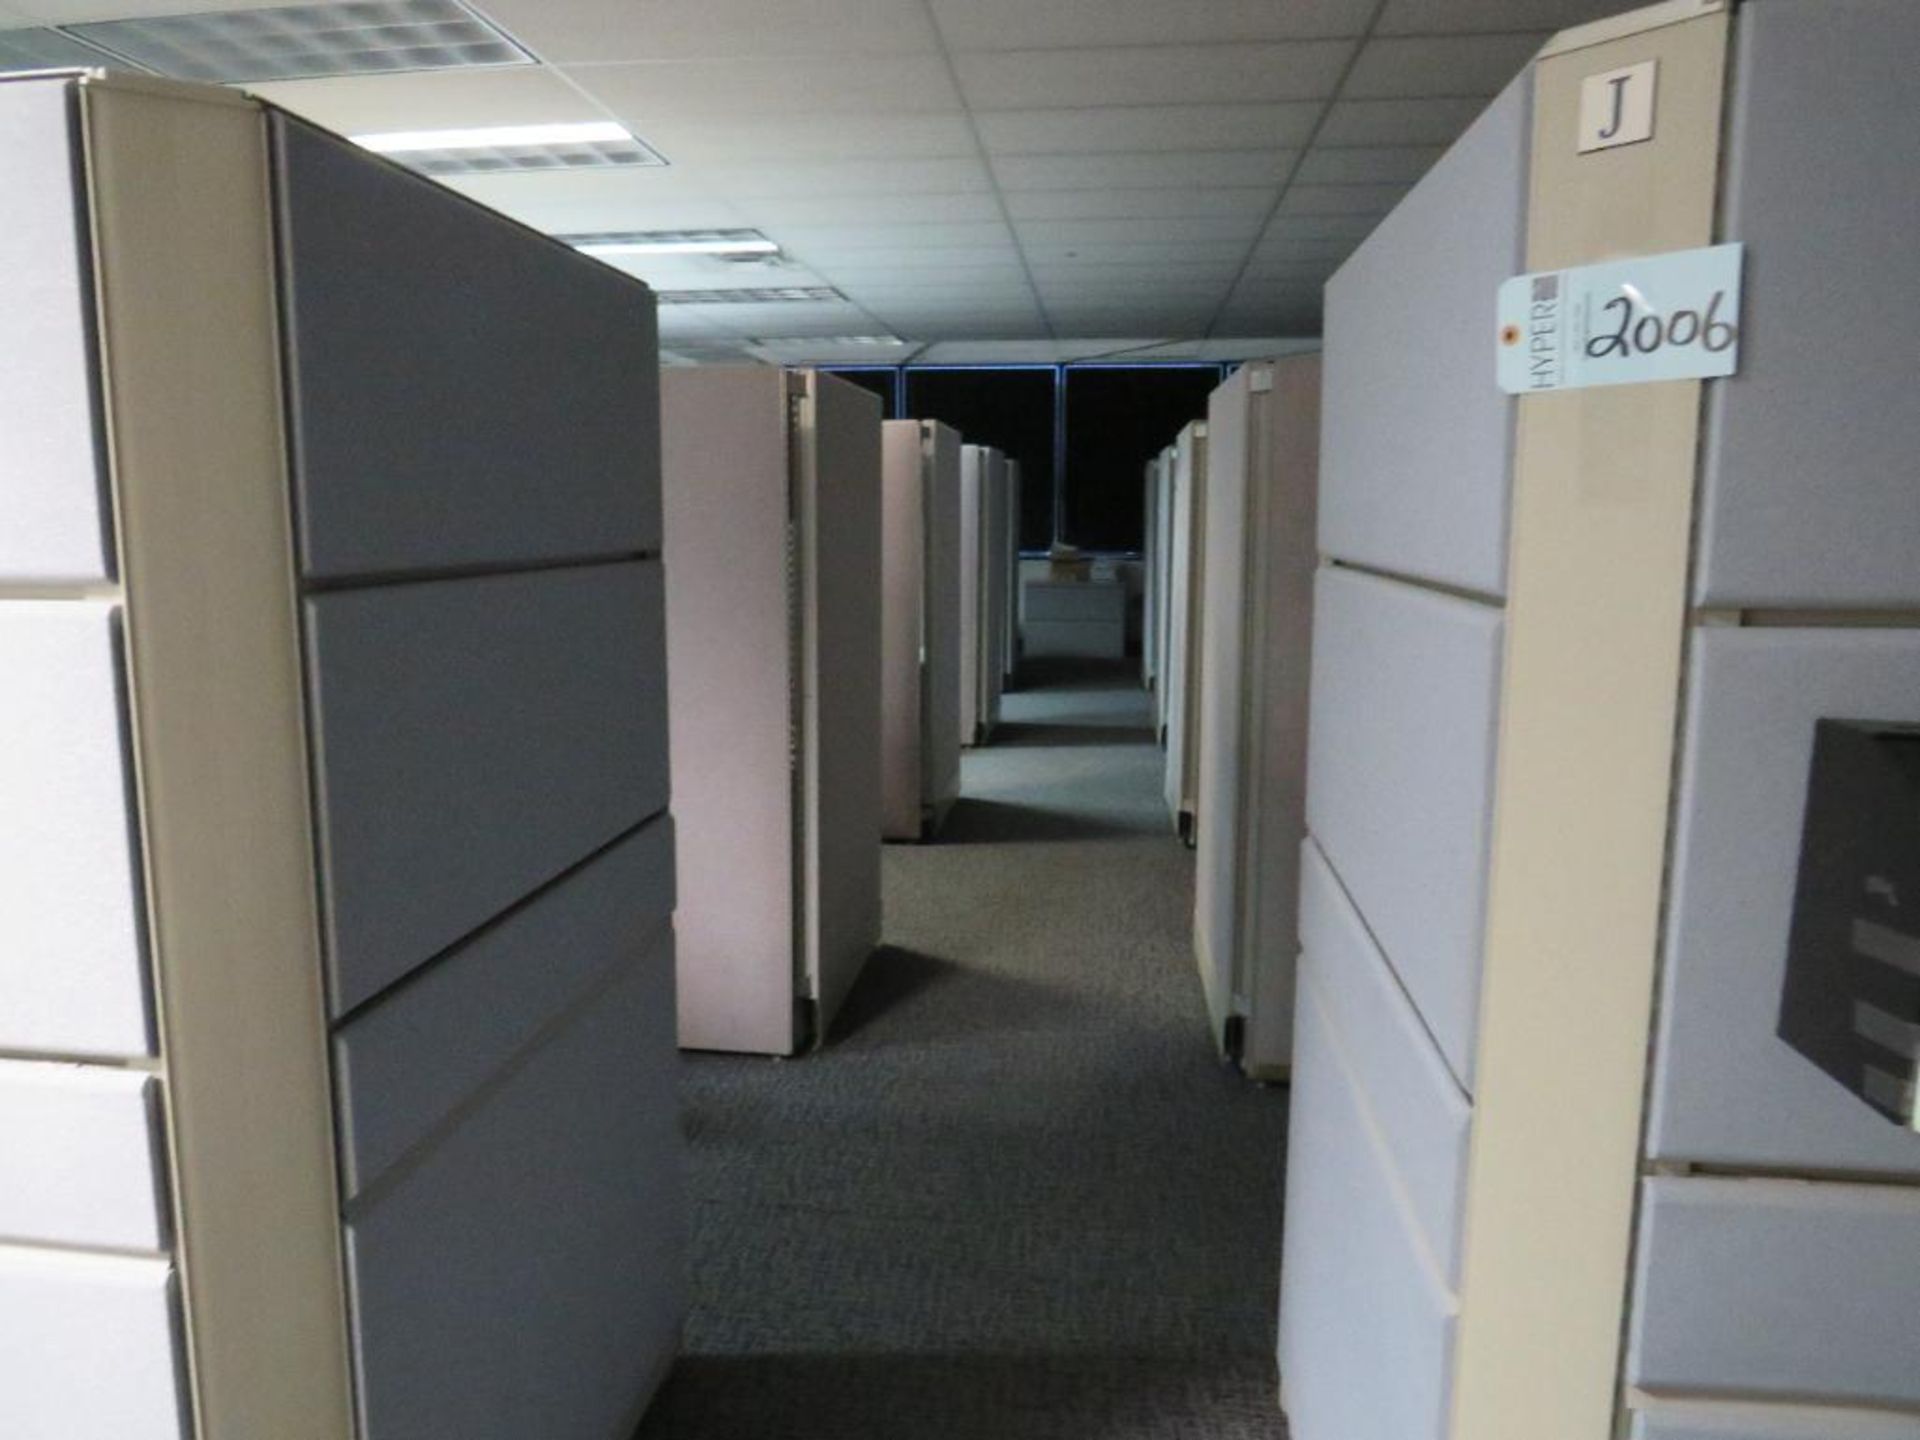 Lot c/o: Large Quantity of Cubicle Partitions w/ Hanging Work Table, on 2nd Floor Approx. 7,100 Sq.